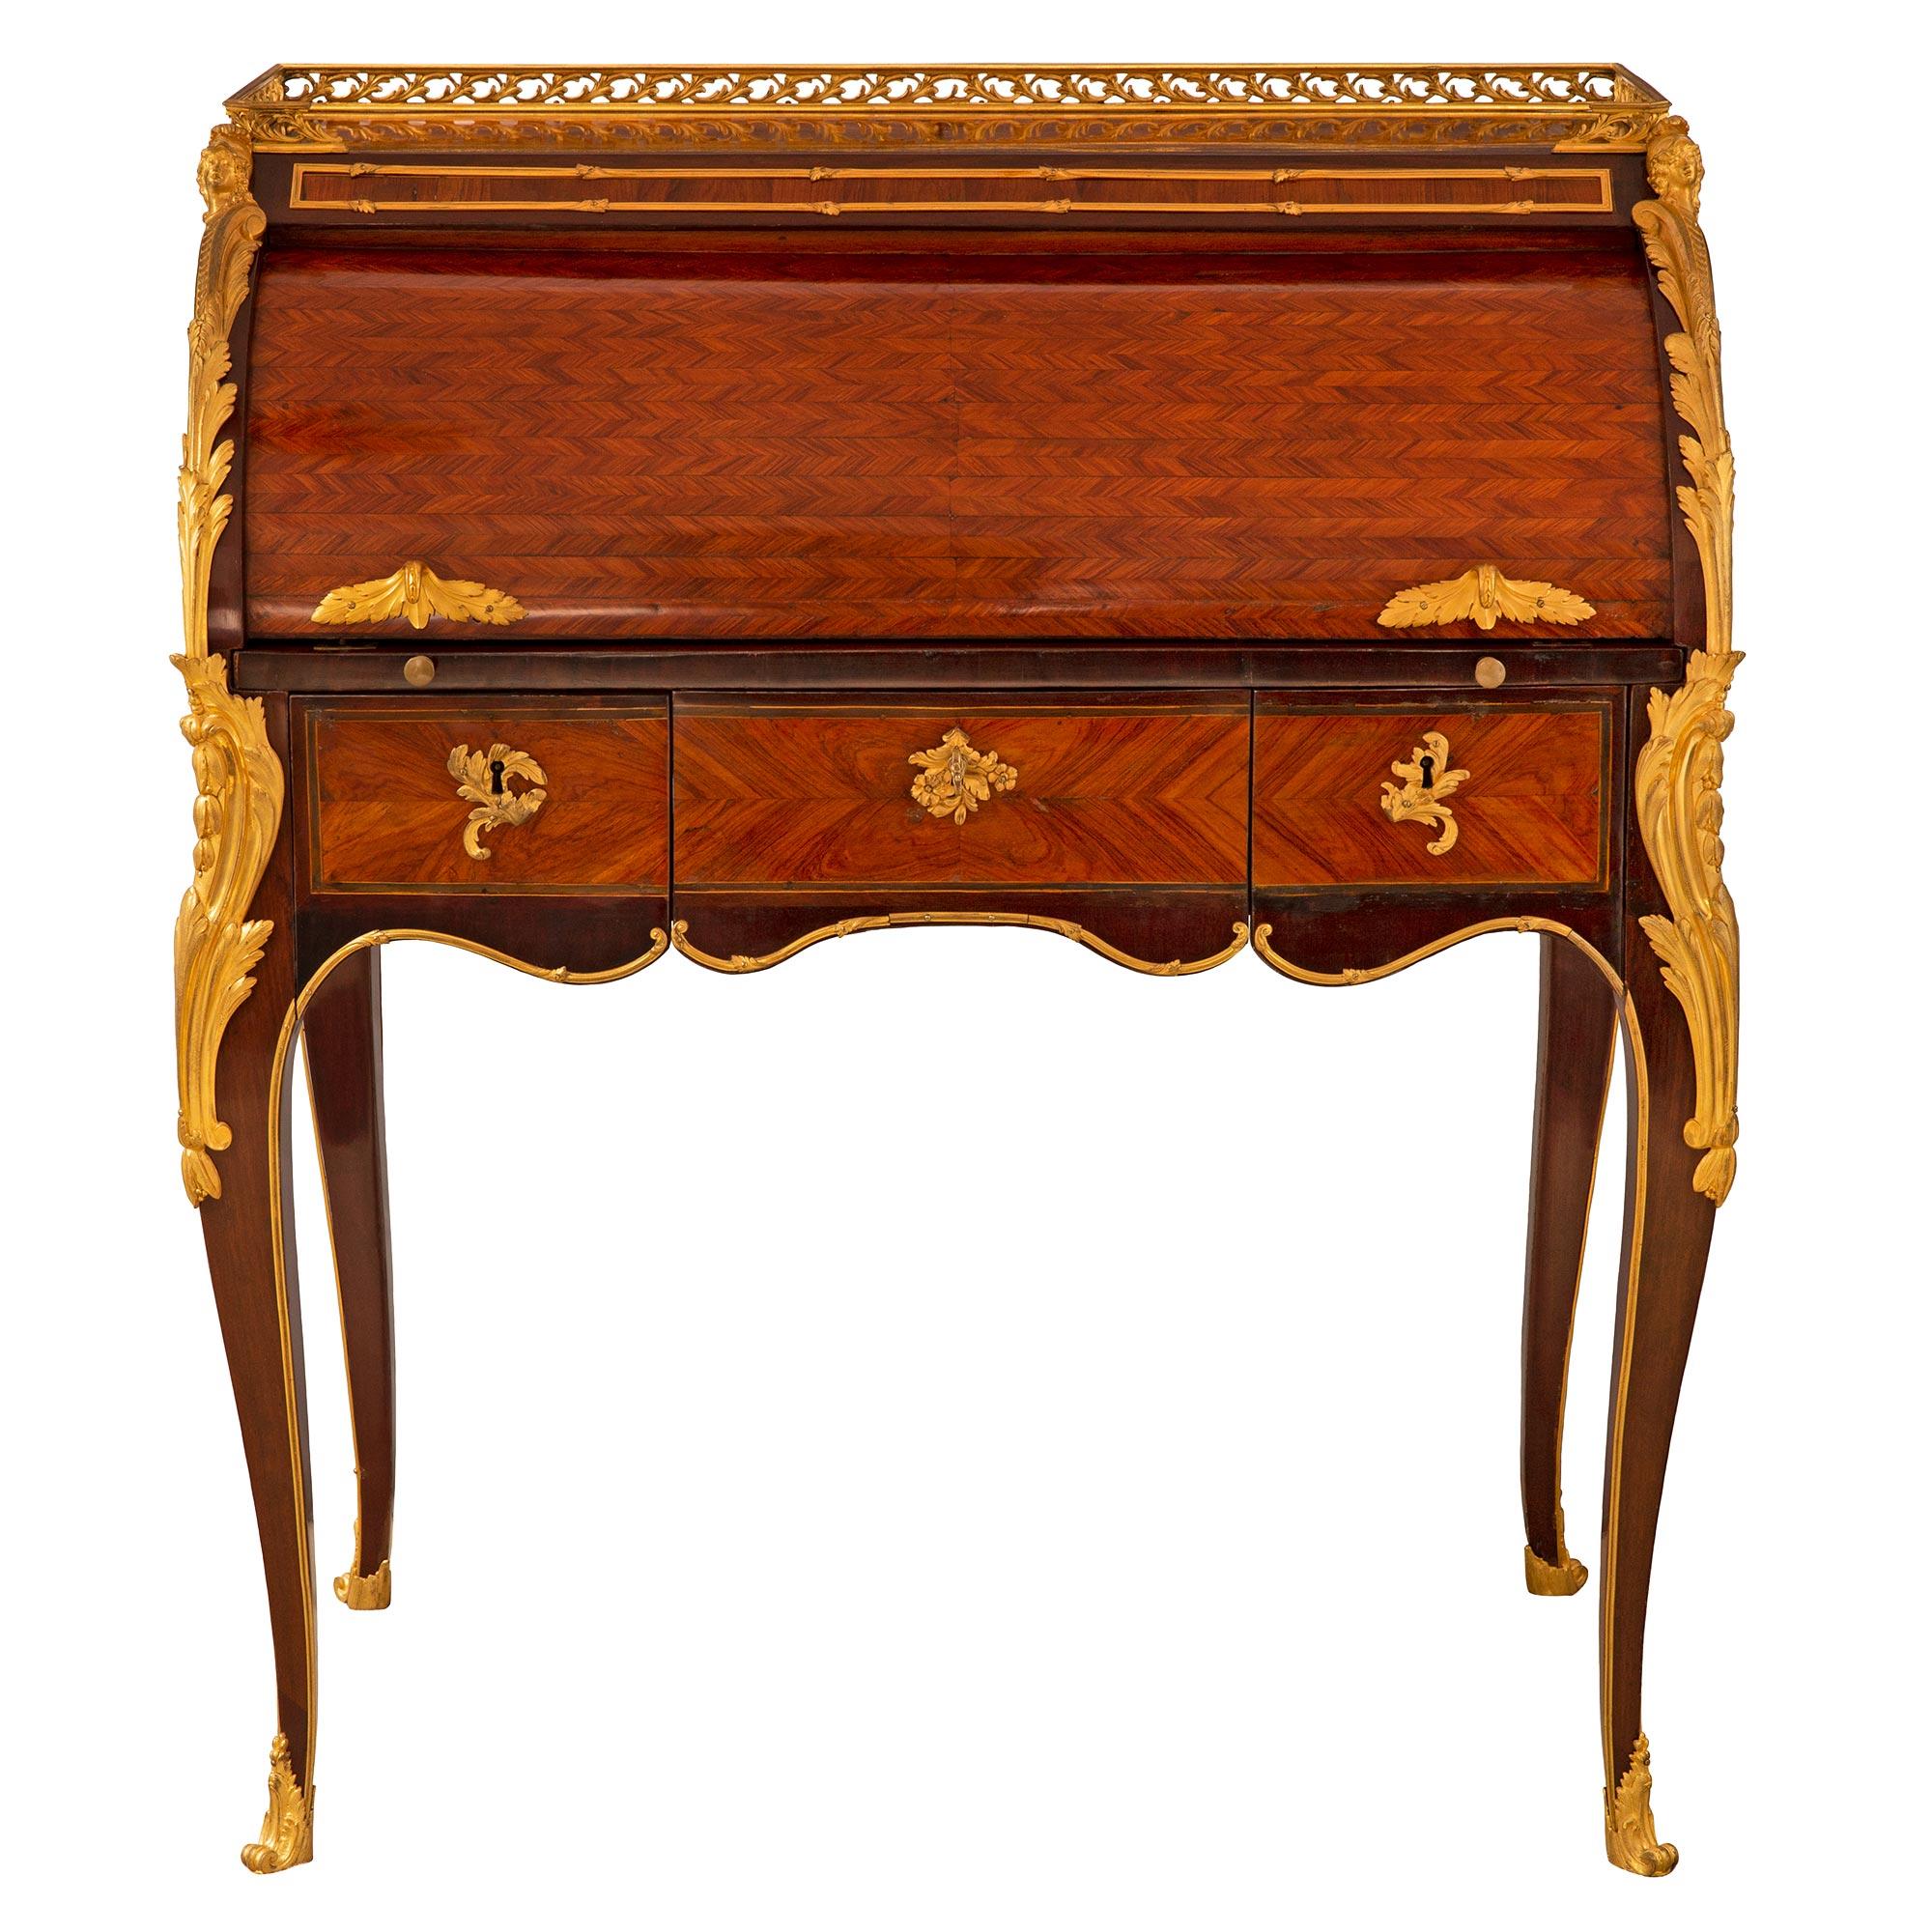 French 18th Century Louis XV Period Kingwood, Tulipwood and Ormolu Desk For Sale